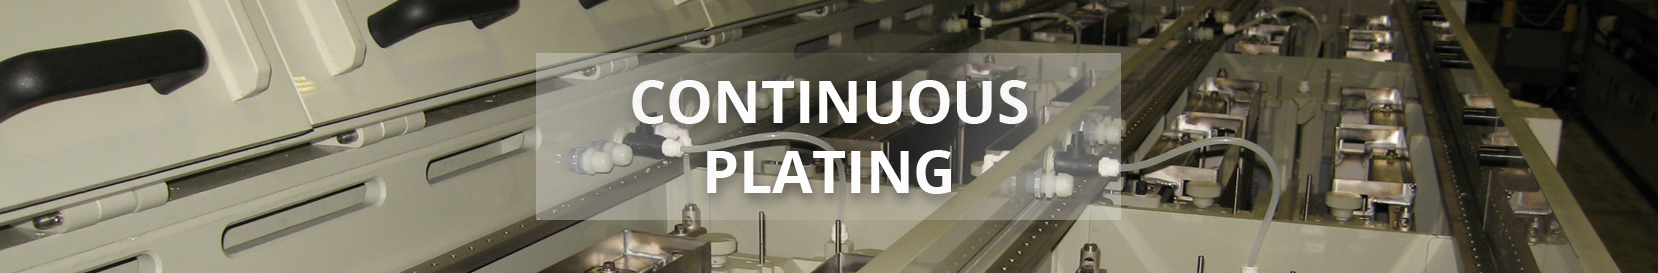 Precision Process Equipment > Equipment > Continuous Plating > Reel to Reel